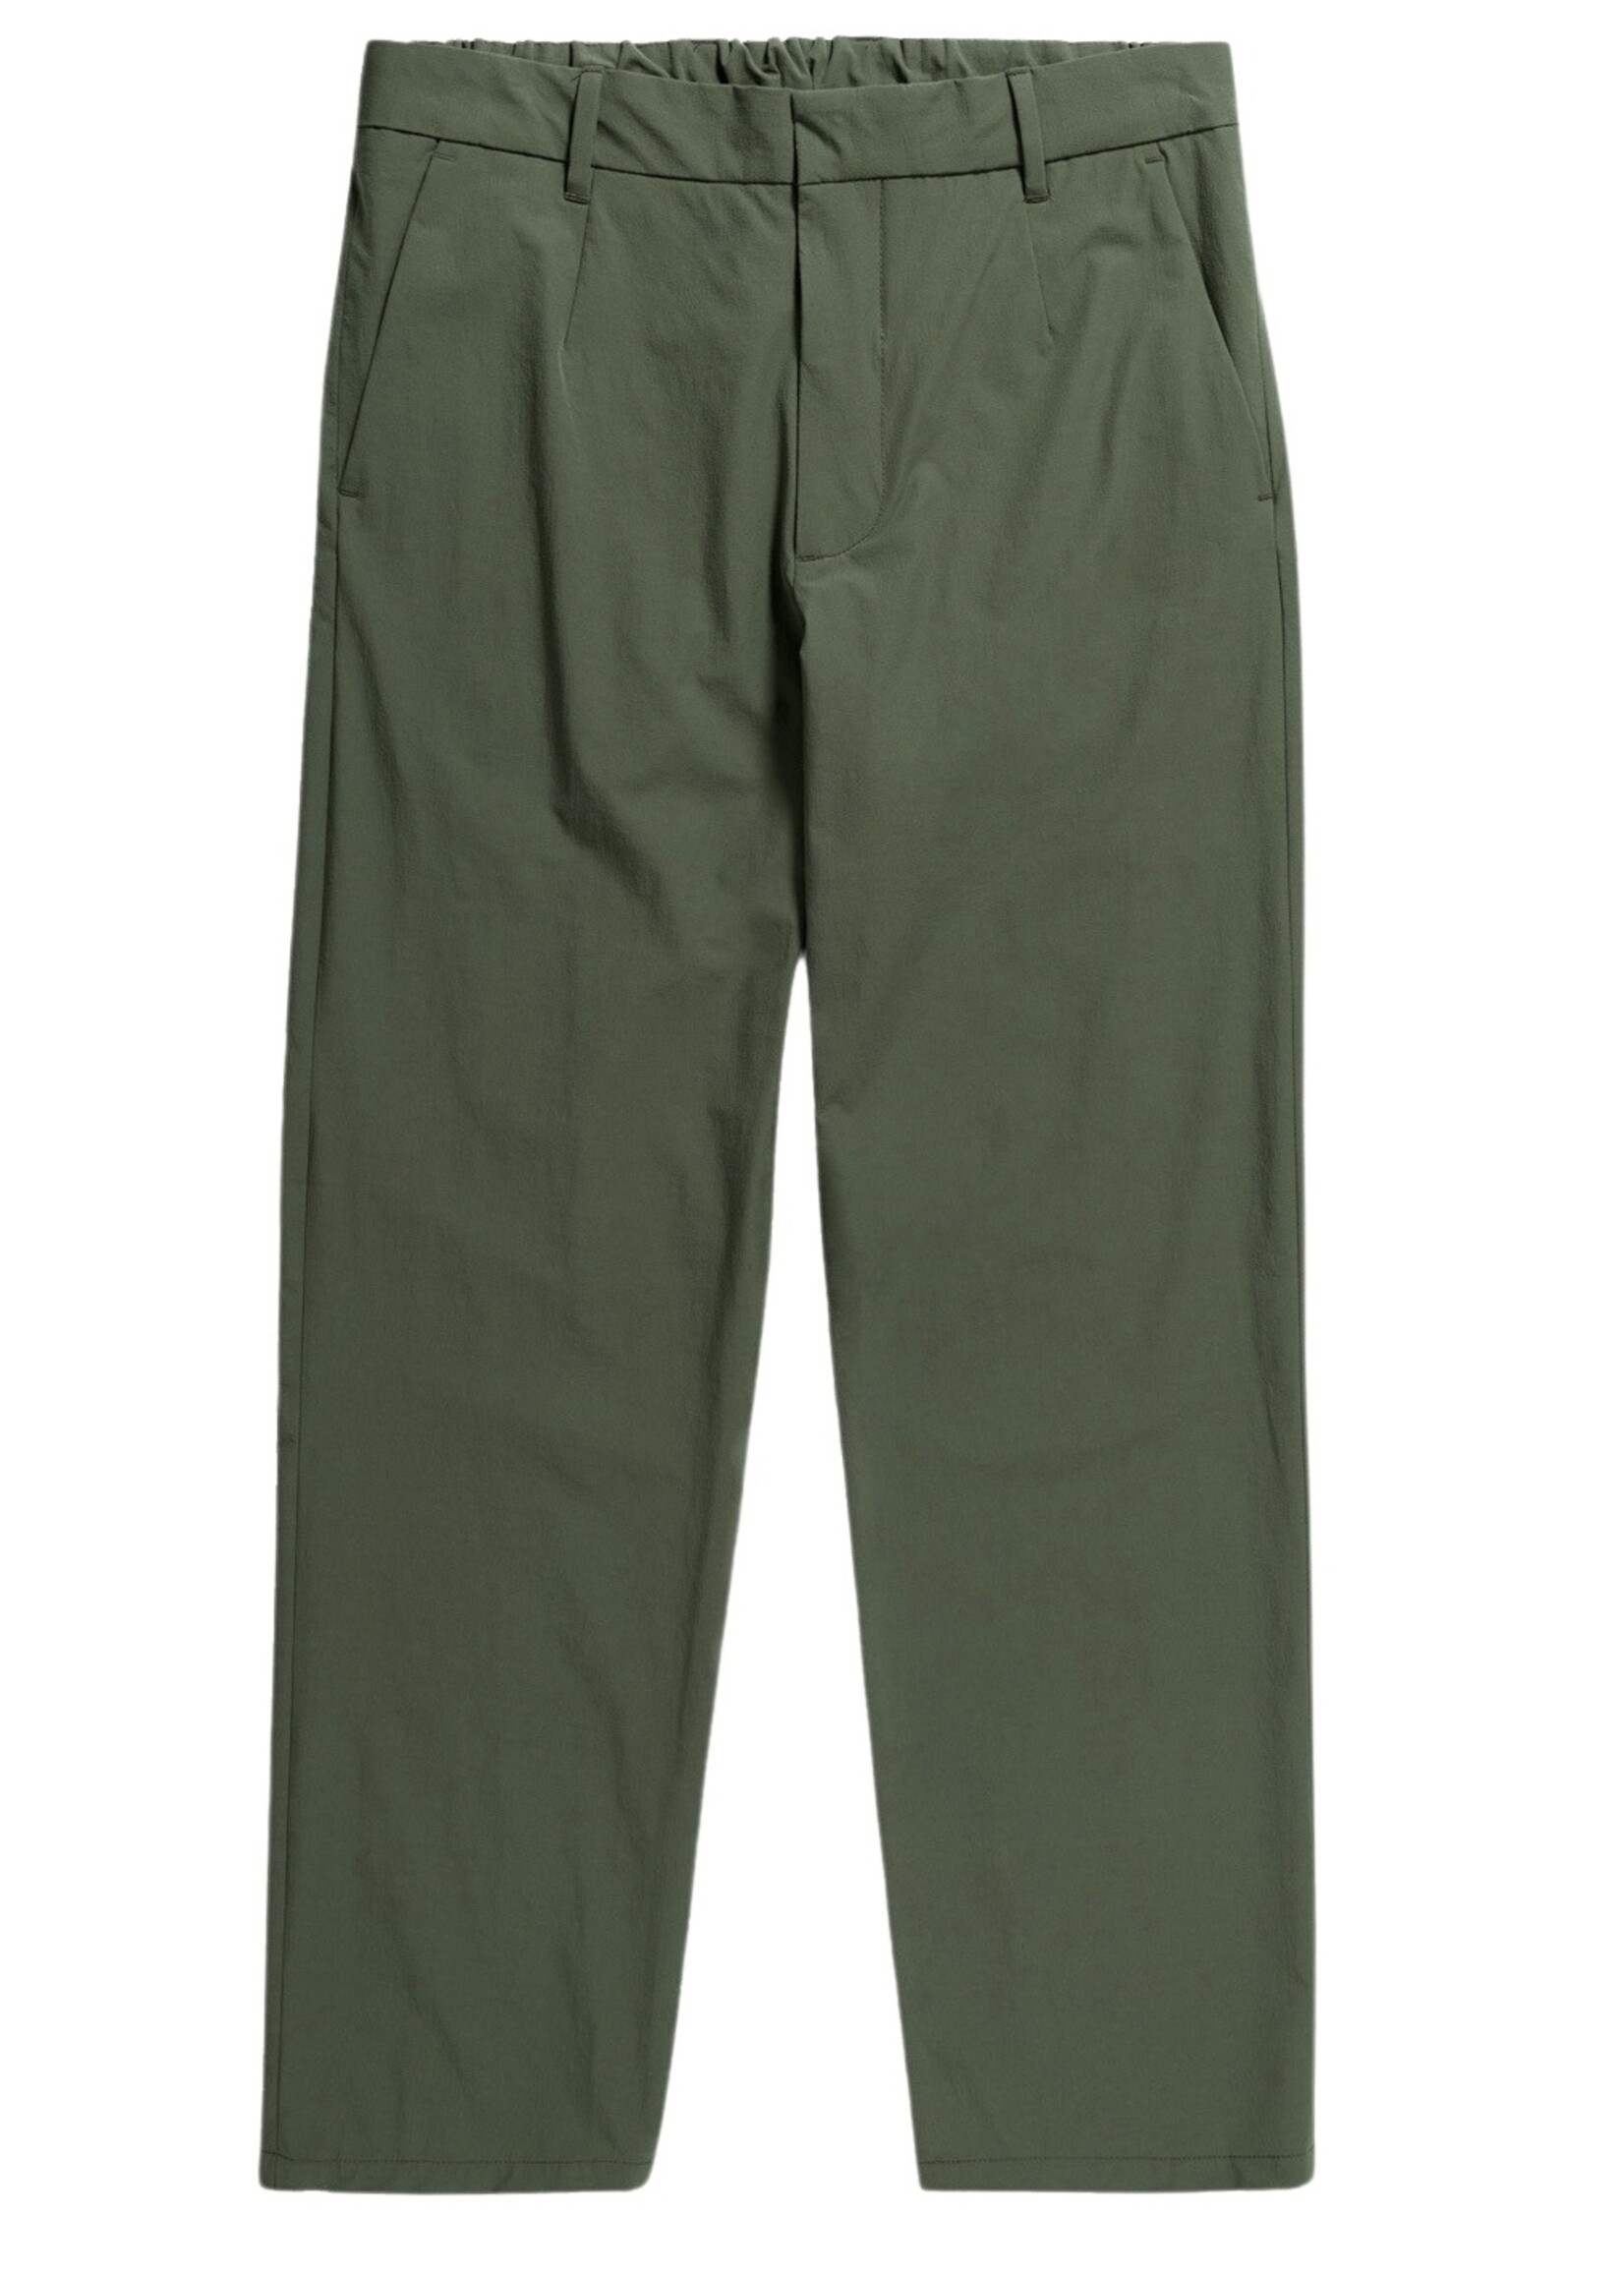 NORSE PROJECTS AAREN TRAVEL LIGHT PANT